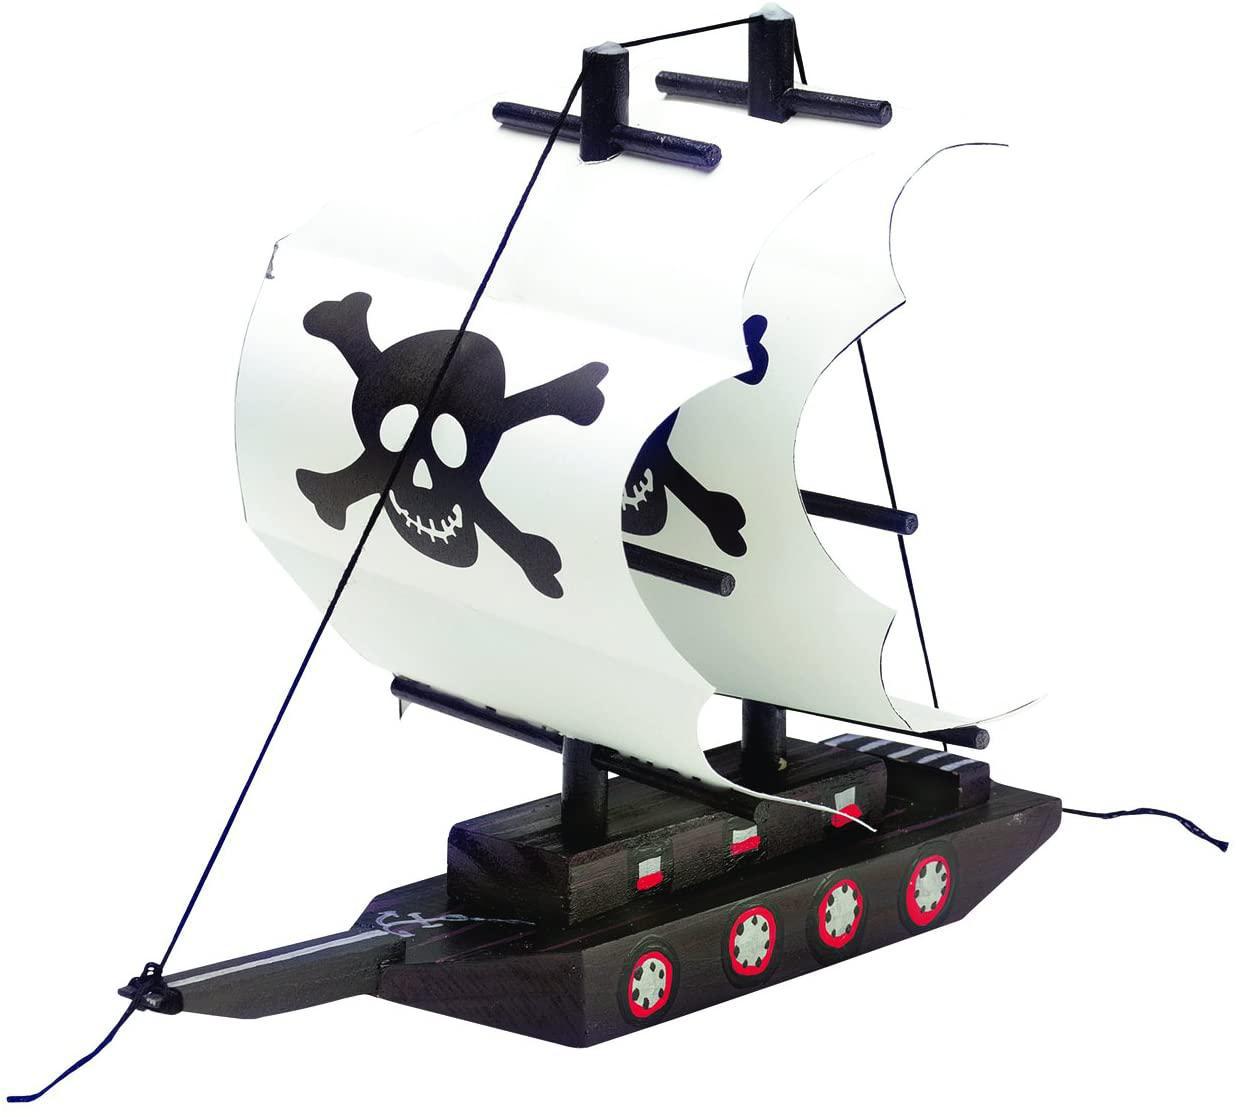 Creativity for Kids Paint Your Own Pirate Ship Paint and Build Mini Kit – Wooden Toy Pirate Ship